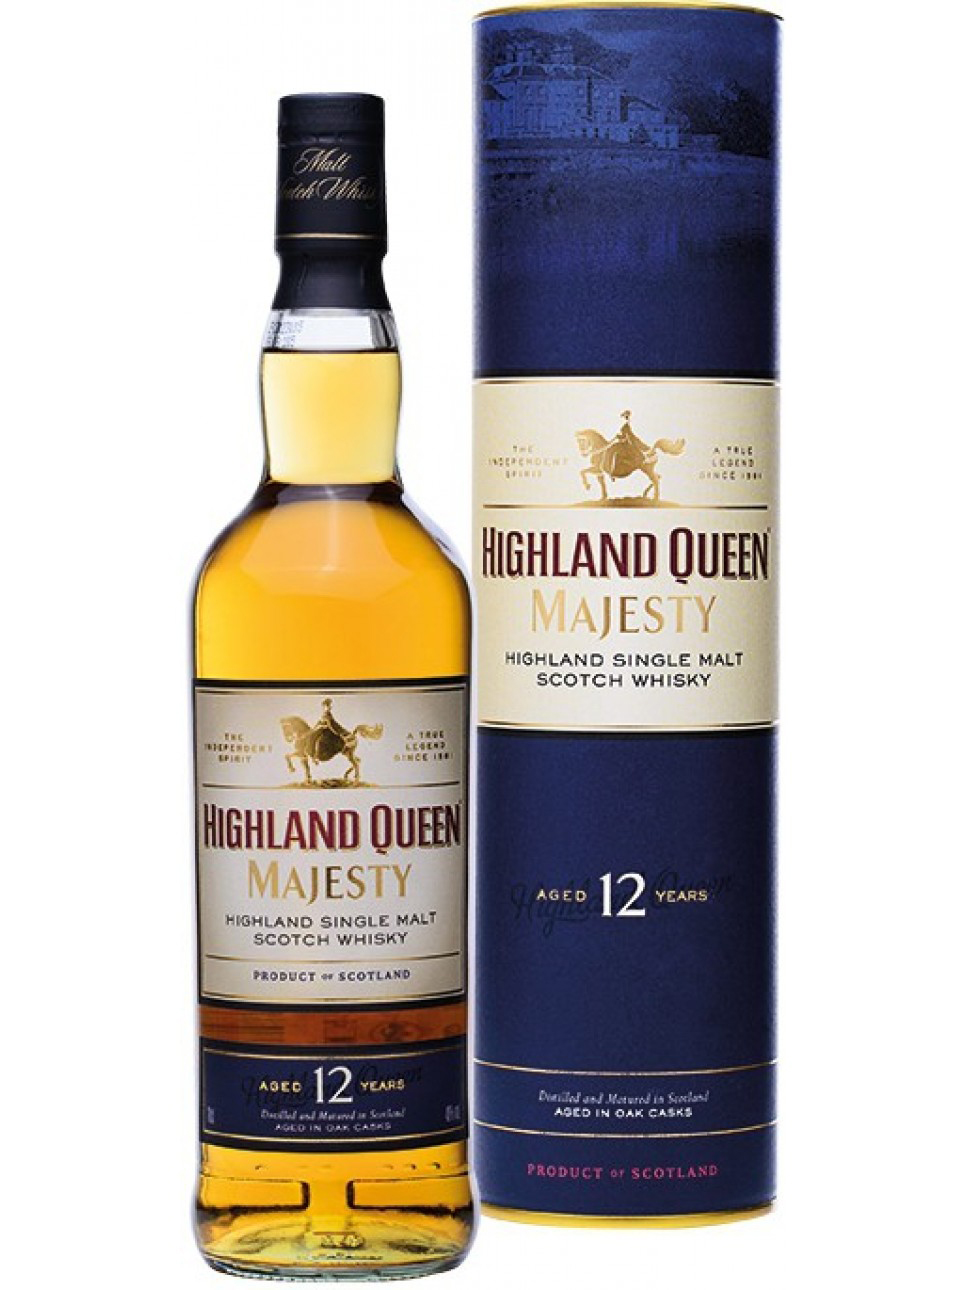 HIGHLAND QUEEN MAJESTY 12 YEARS